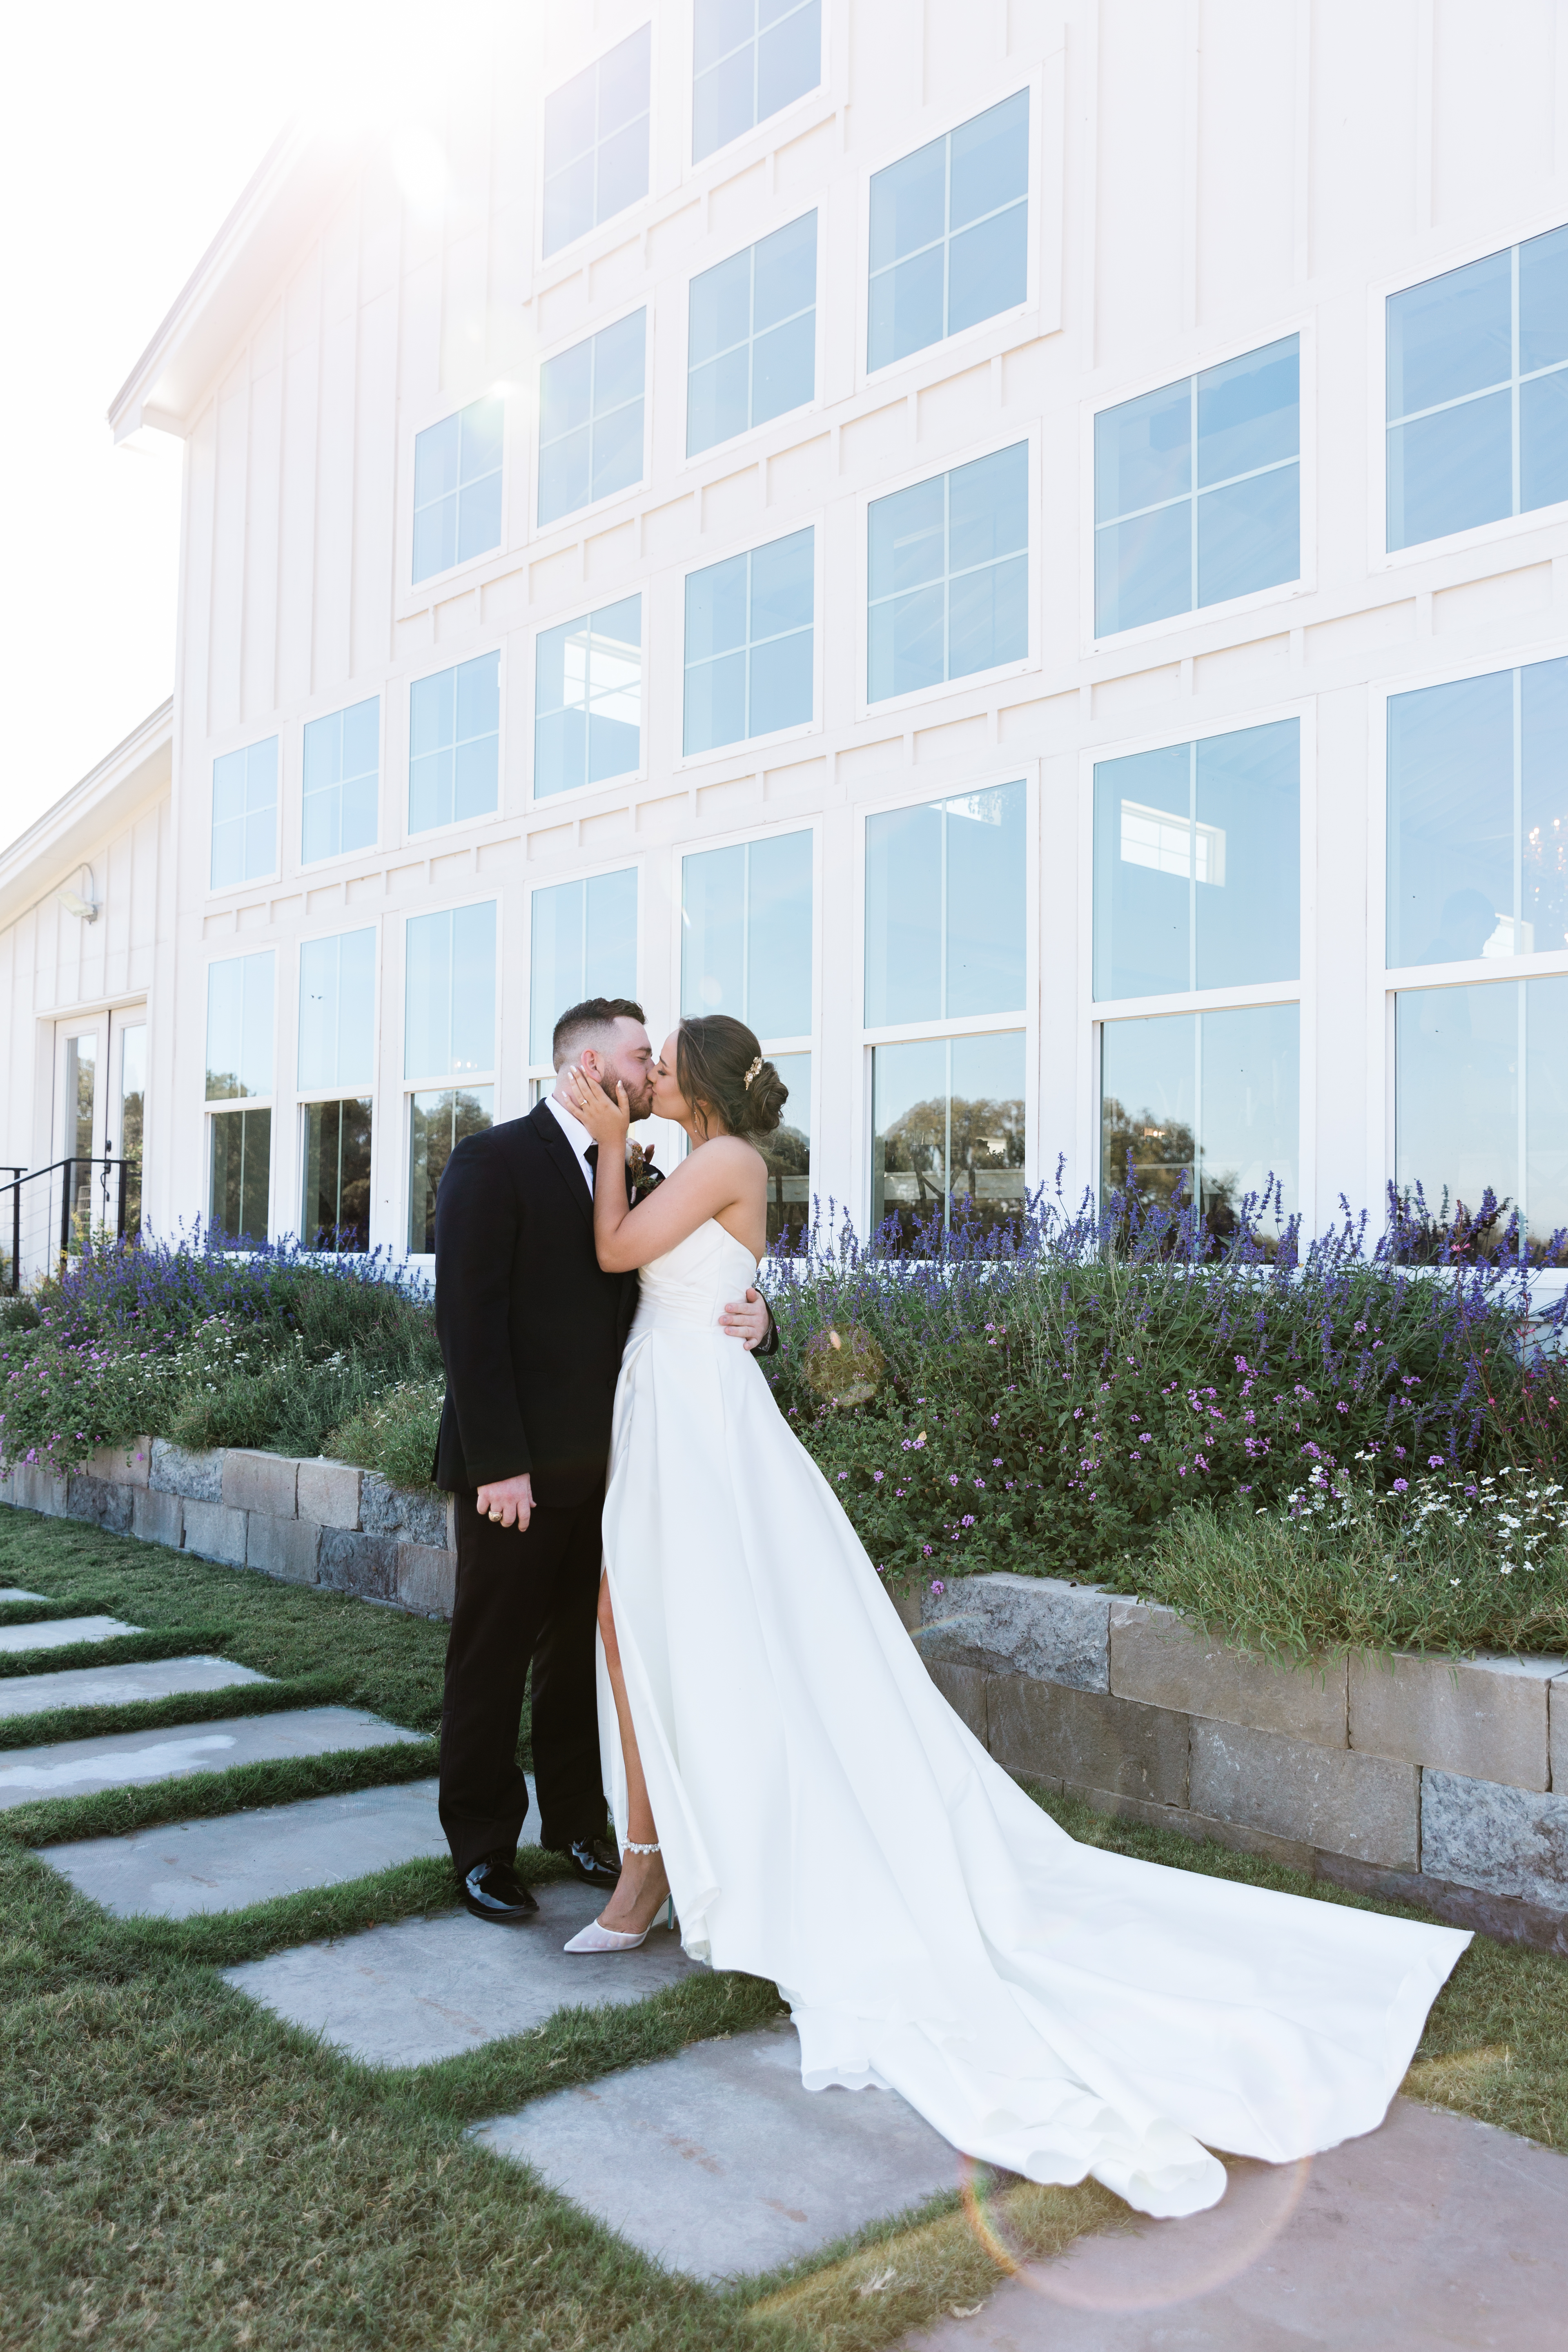 A vibrant sunset casting warm hues over the bride and groom, creating a romantic ambiance.